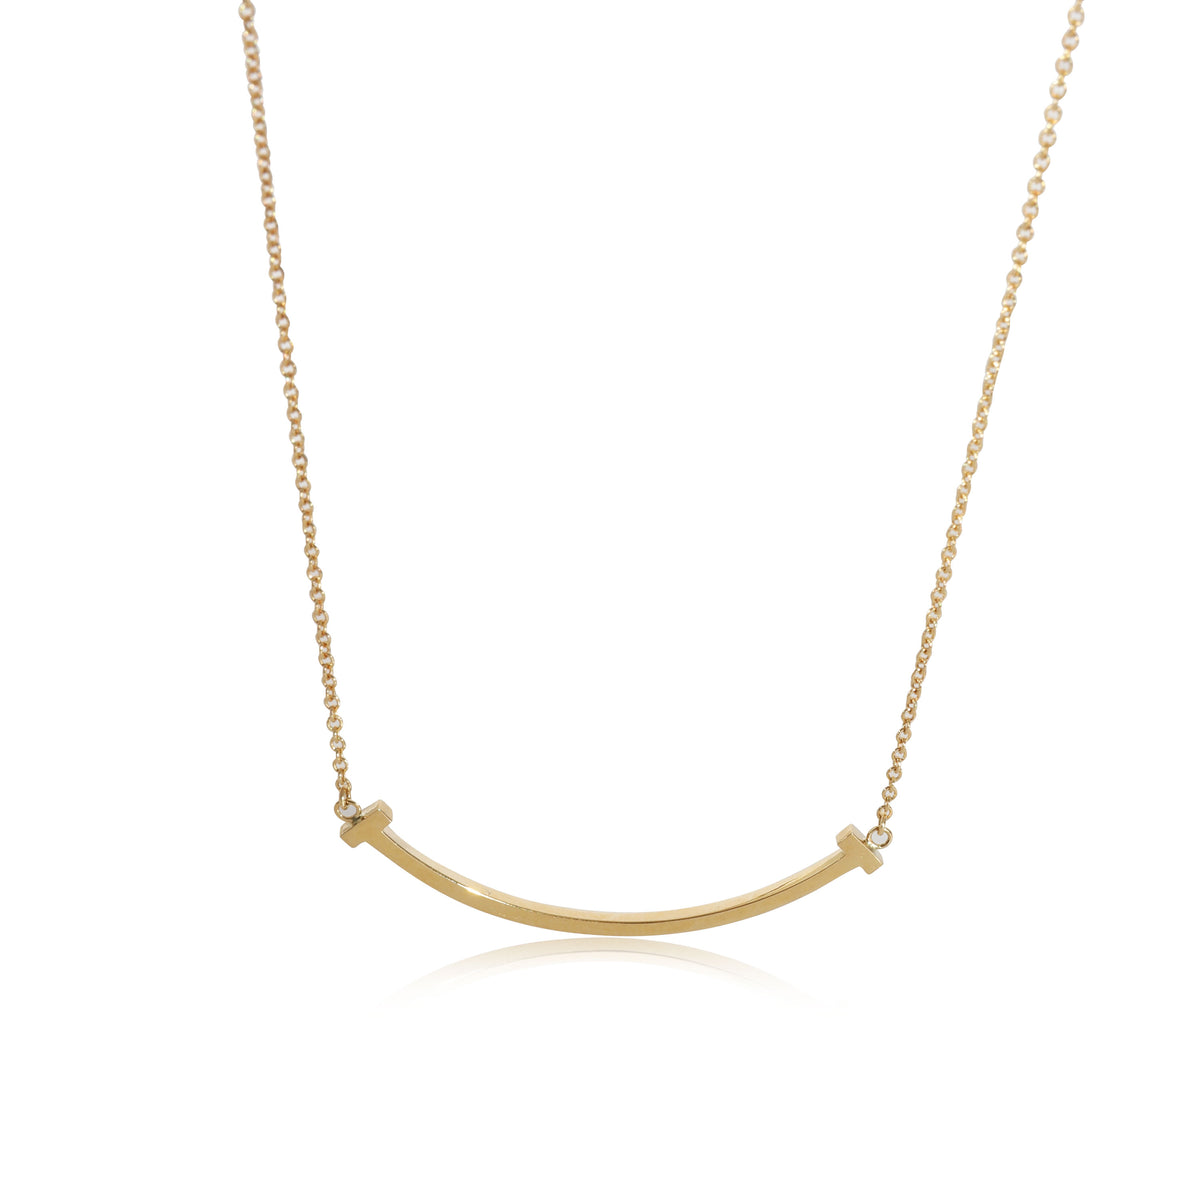 Tiffany & Co. Smile Necklace in 18k Yellow Gold